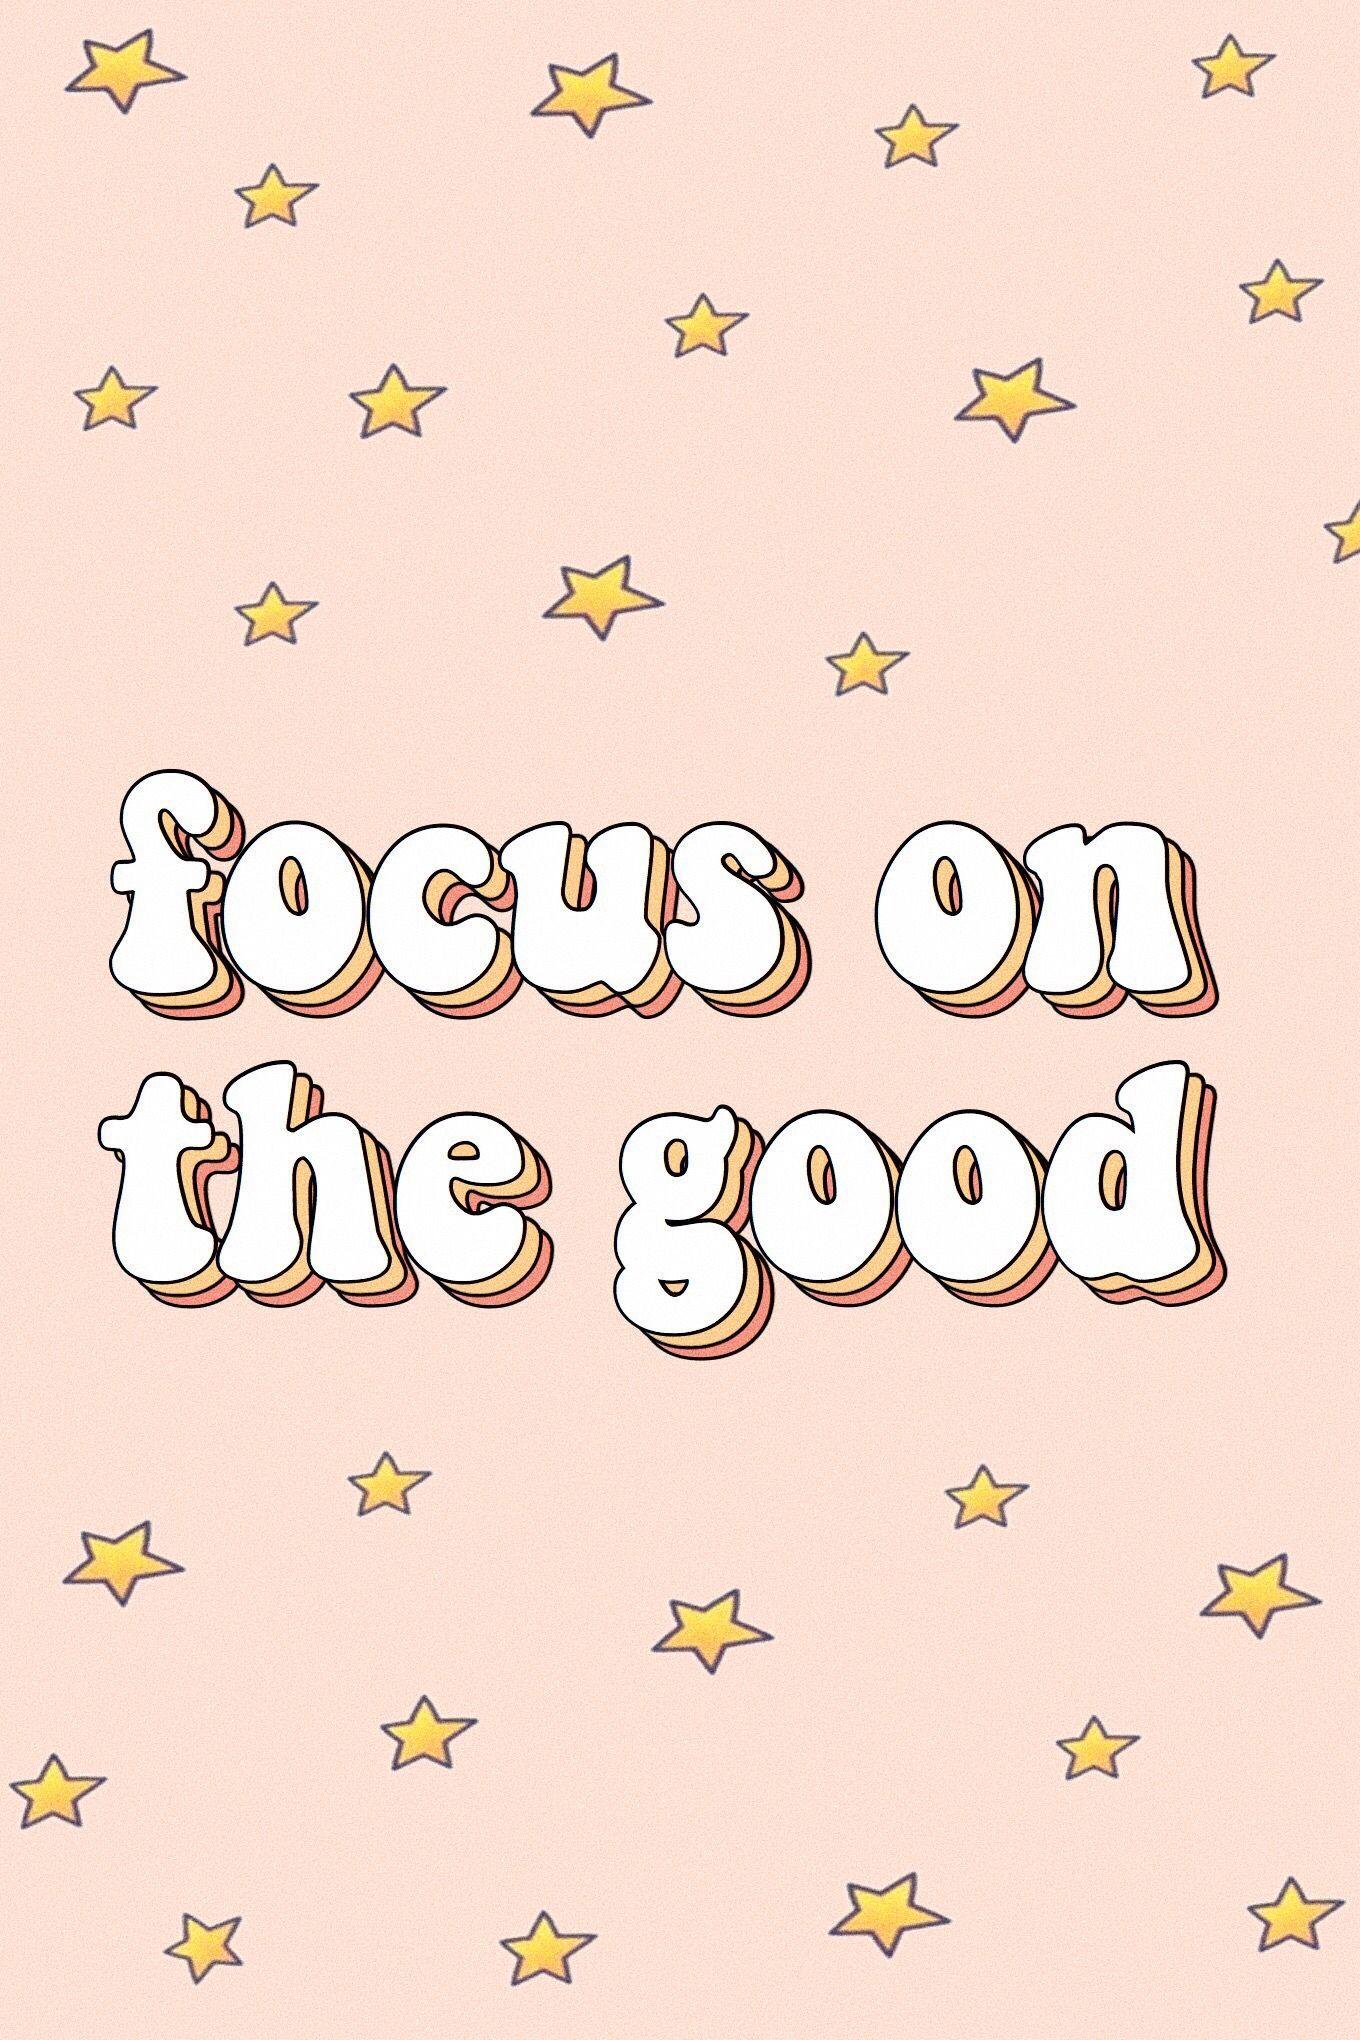 focus on the good words quotes positivity happiness motivate vsco aesthetic tumblr retro stars pink. Happy words, Wallpaper quotes, Cool words